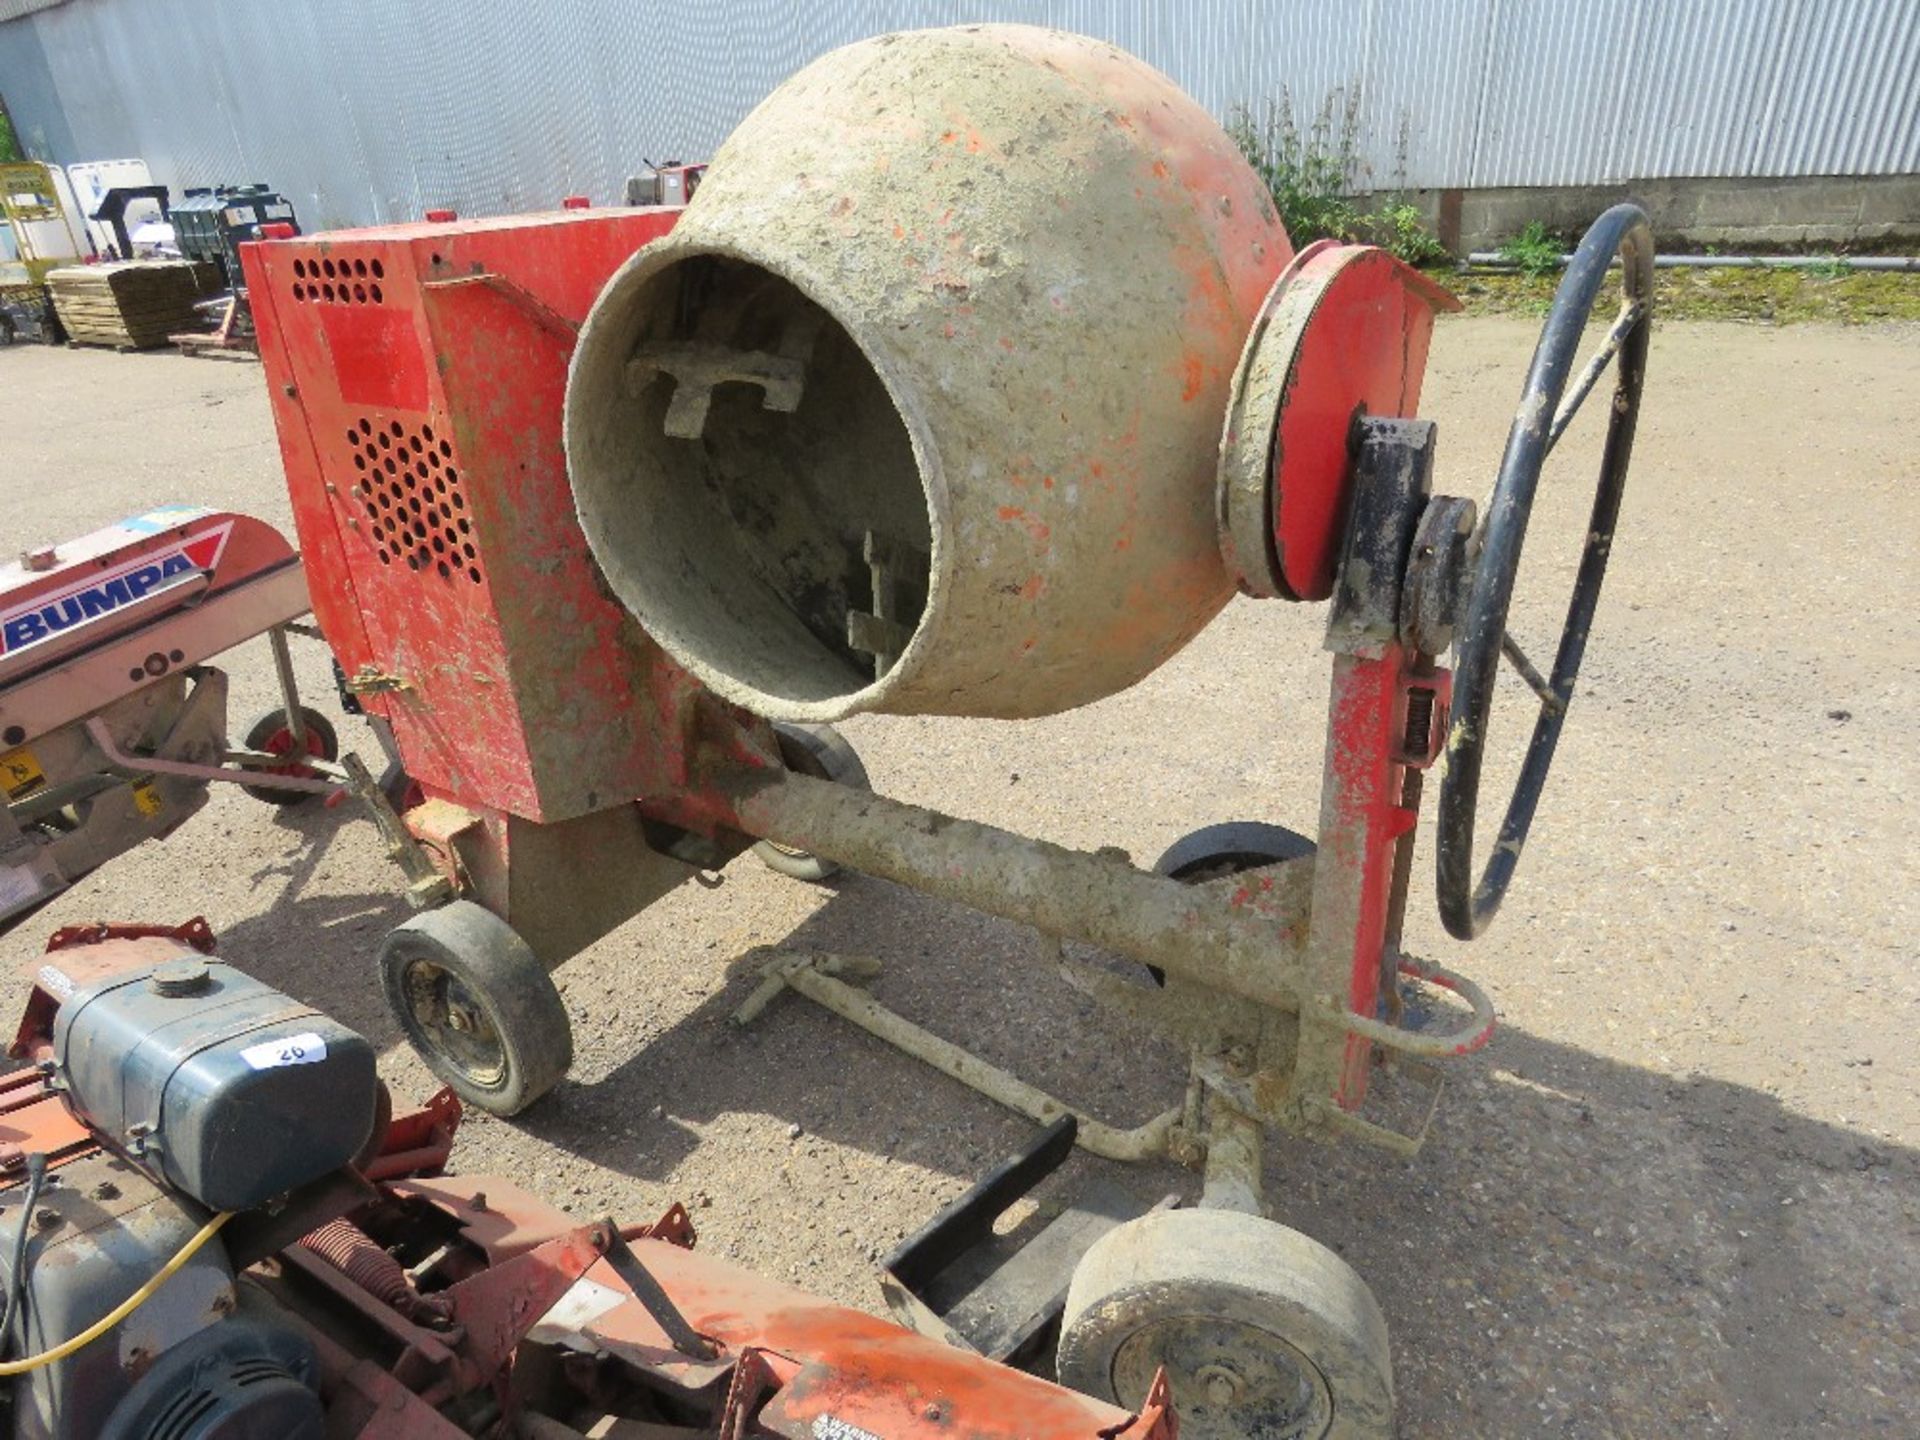 BELLE YANMAR ENGINED CEMENT MIXER. WHEN TESTED WAS SEEN TO RUN AND DRUM TURNED.